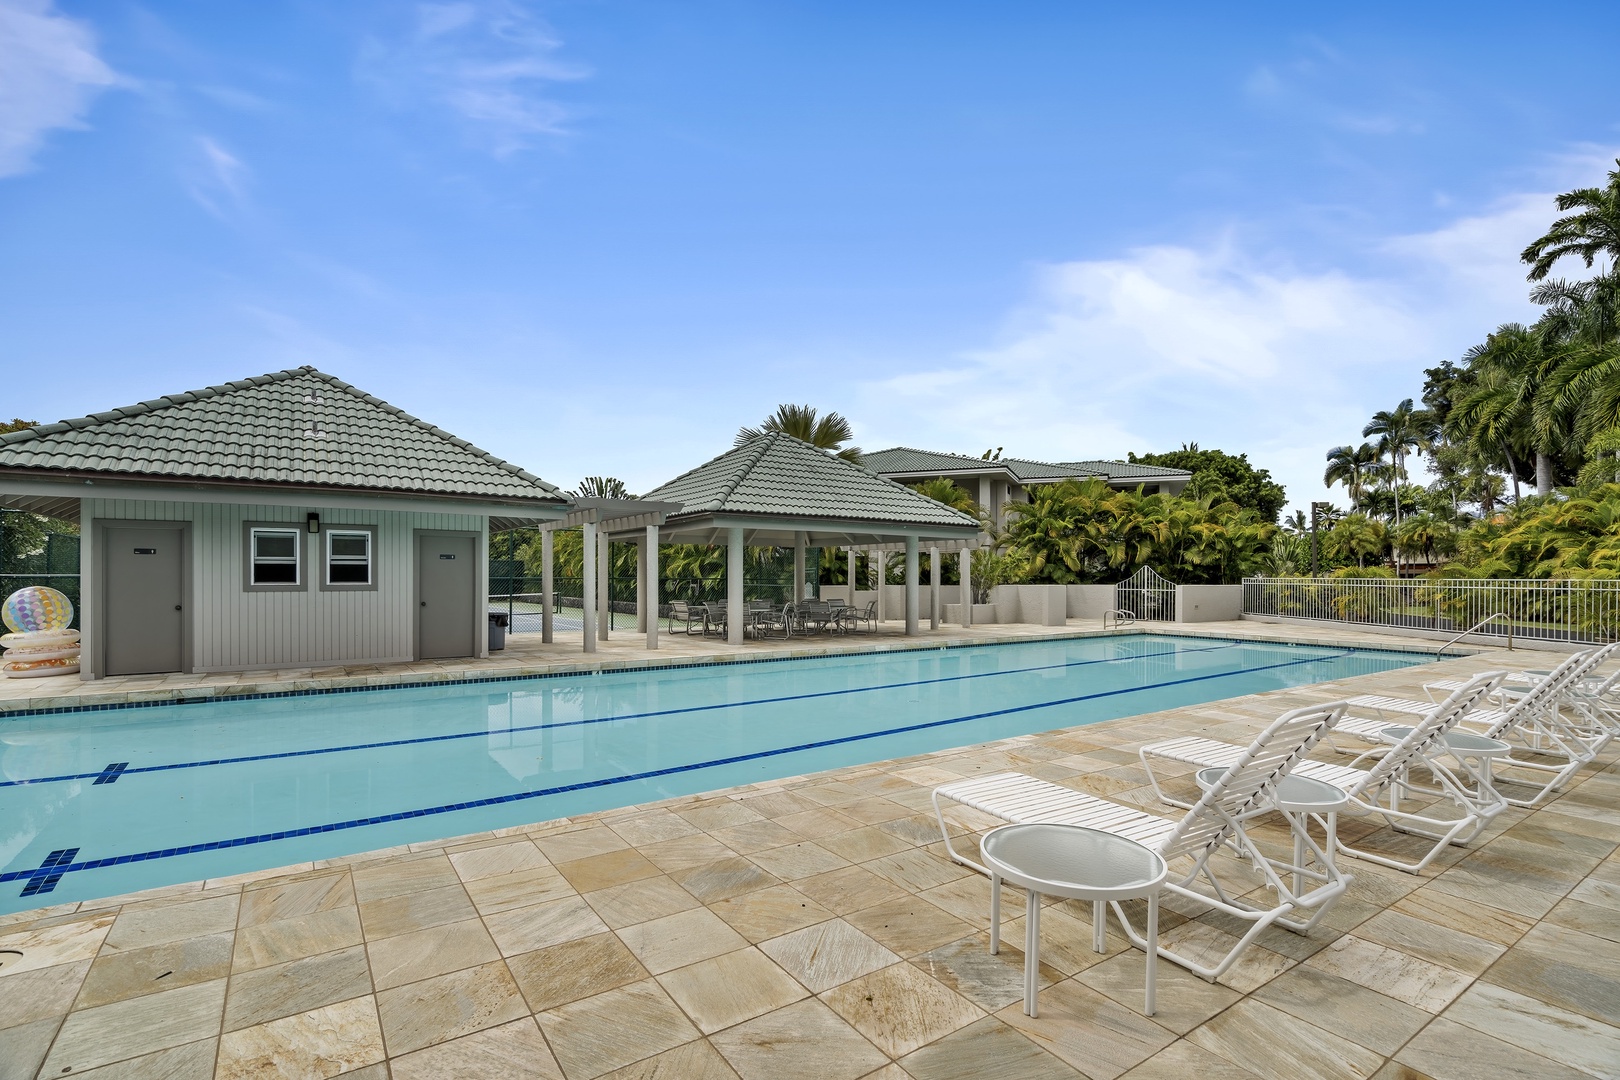 Kailua Kona Vacation Rentals, Ali'i Point #12 - Community pool with loungers accessible to the guests of Alii Point